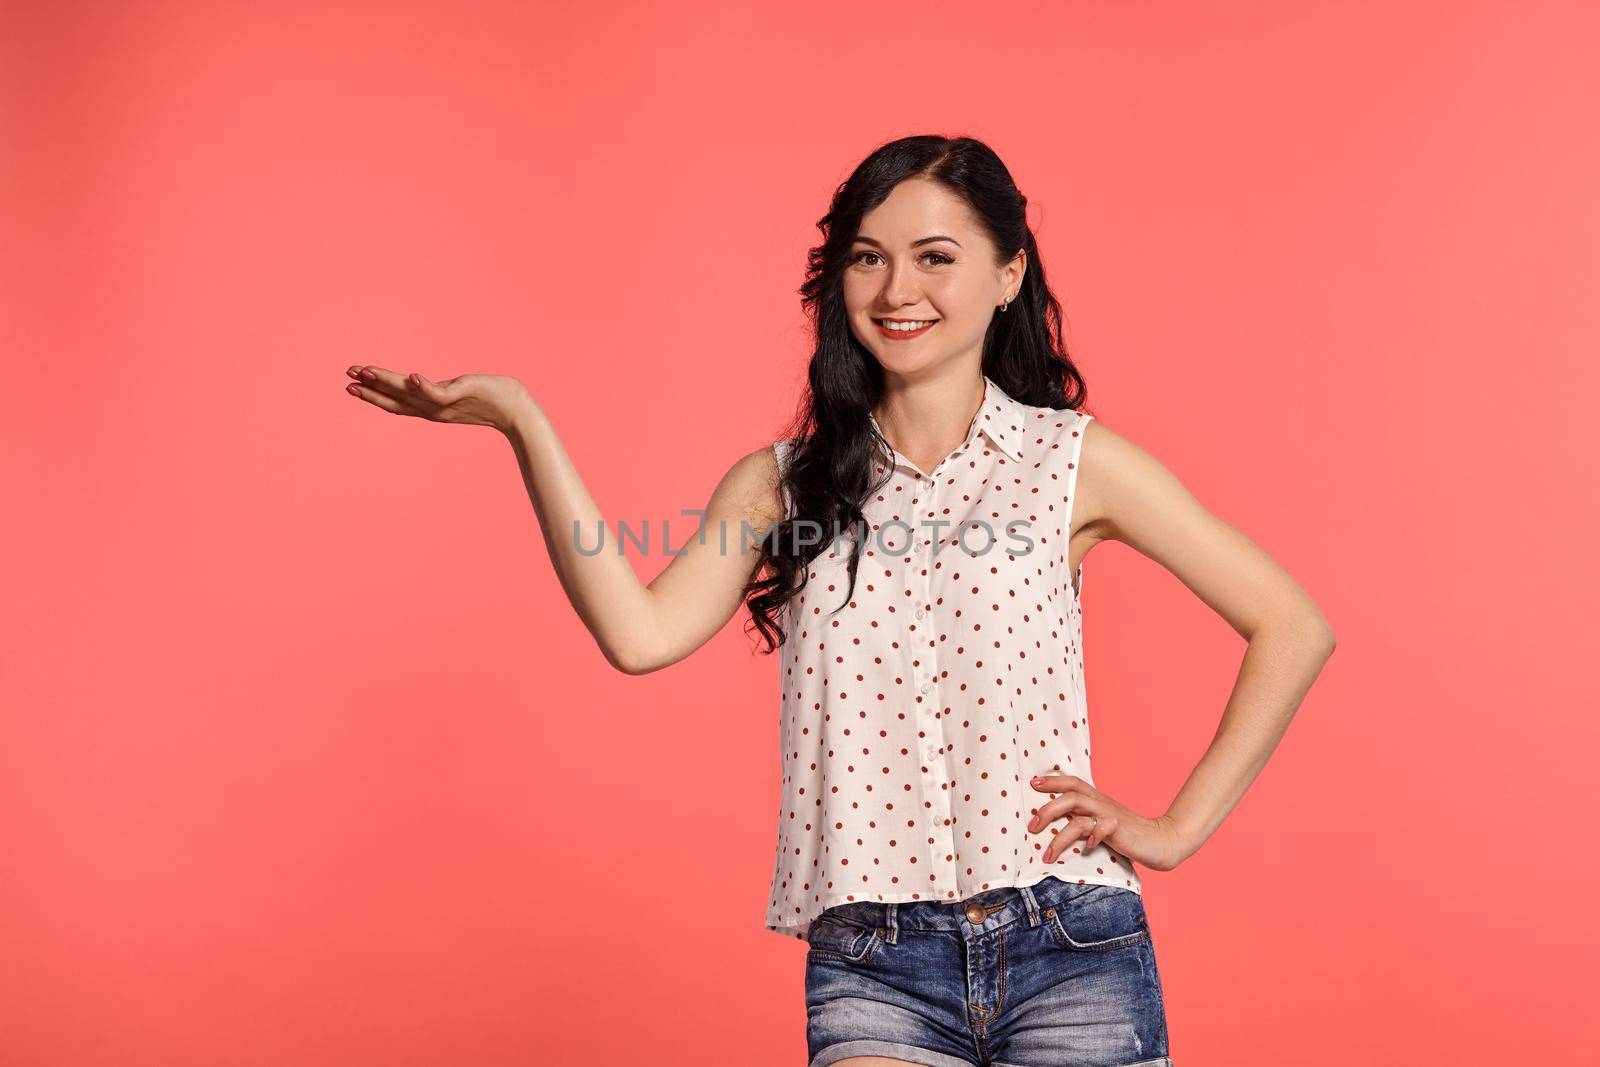 Close-up studio shot of a nice girl teenager looking happy, wearing casual white polka dot blouse and denim short shorts. Little brunette female acting like holding something in her hand, posing over a pink background. People and sincere emotions.